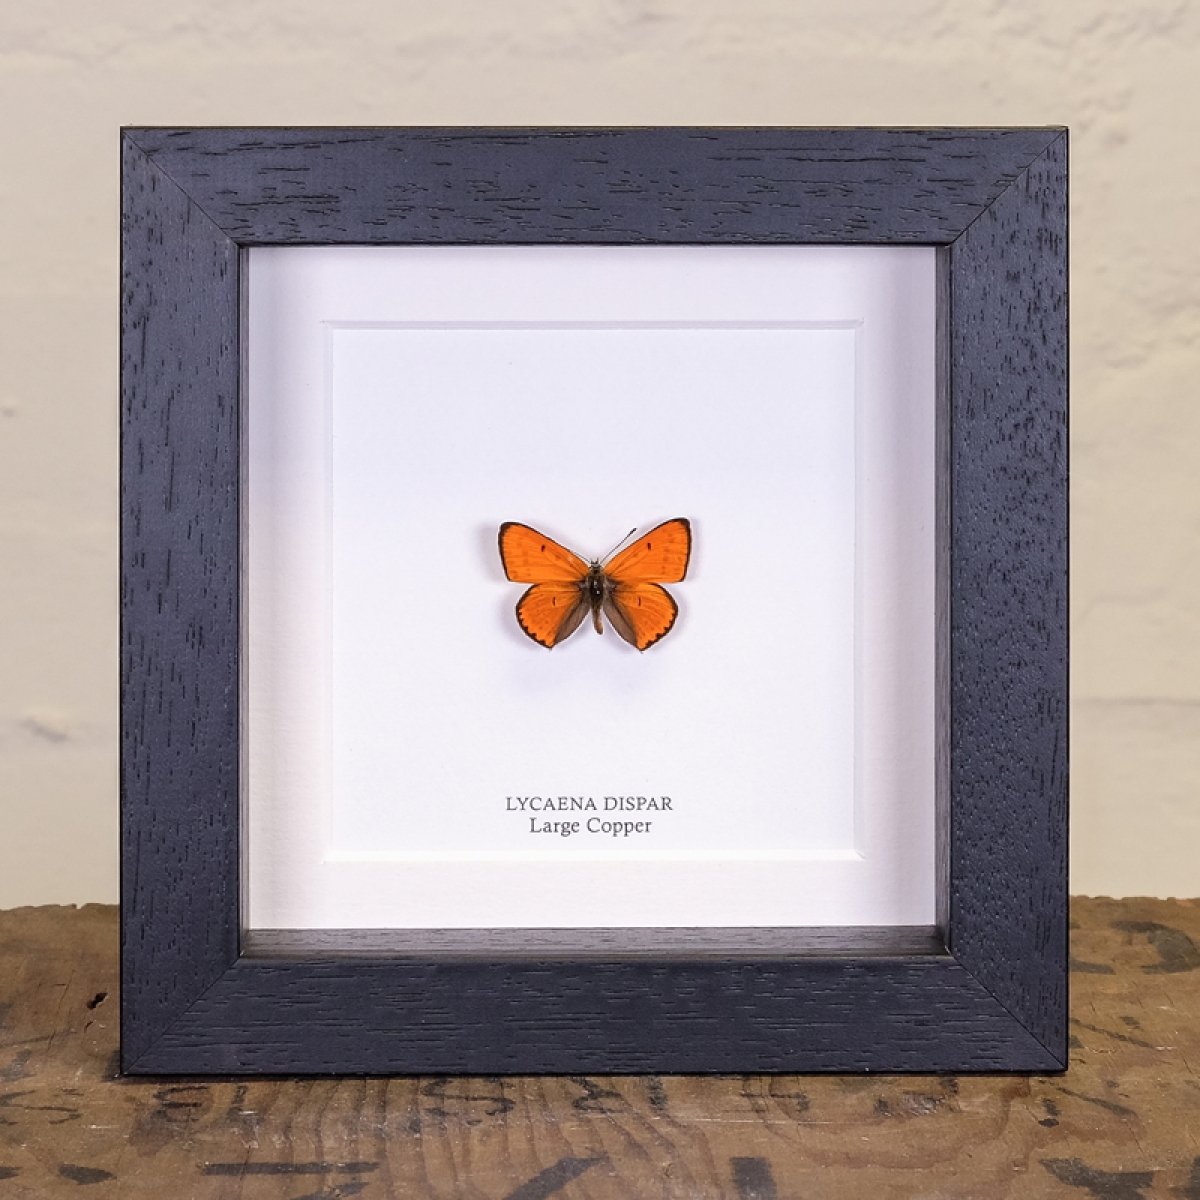 Minibeast The Large Copper Butterfly in Box Frame (Lycaena dispar)